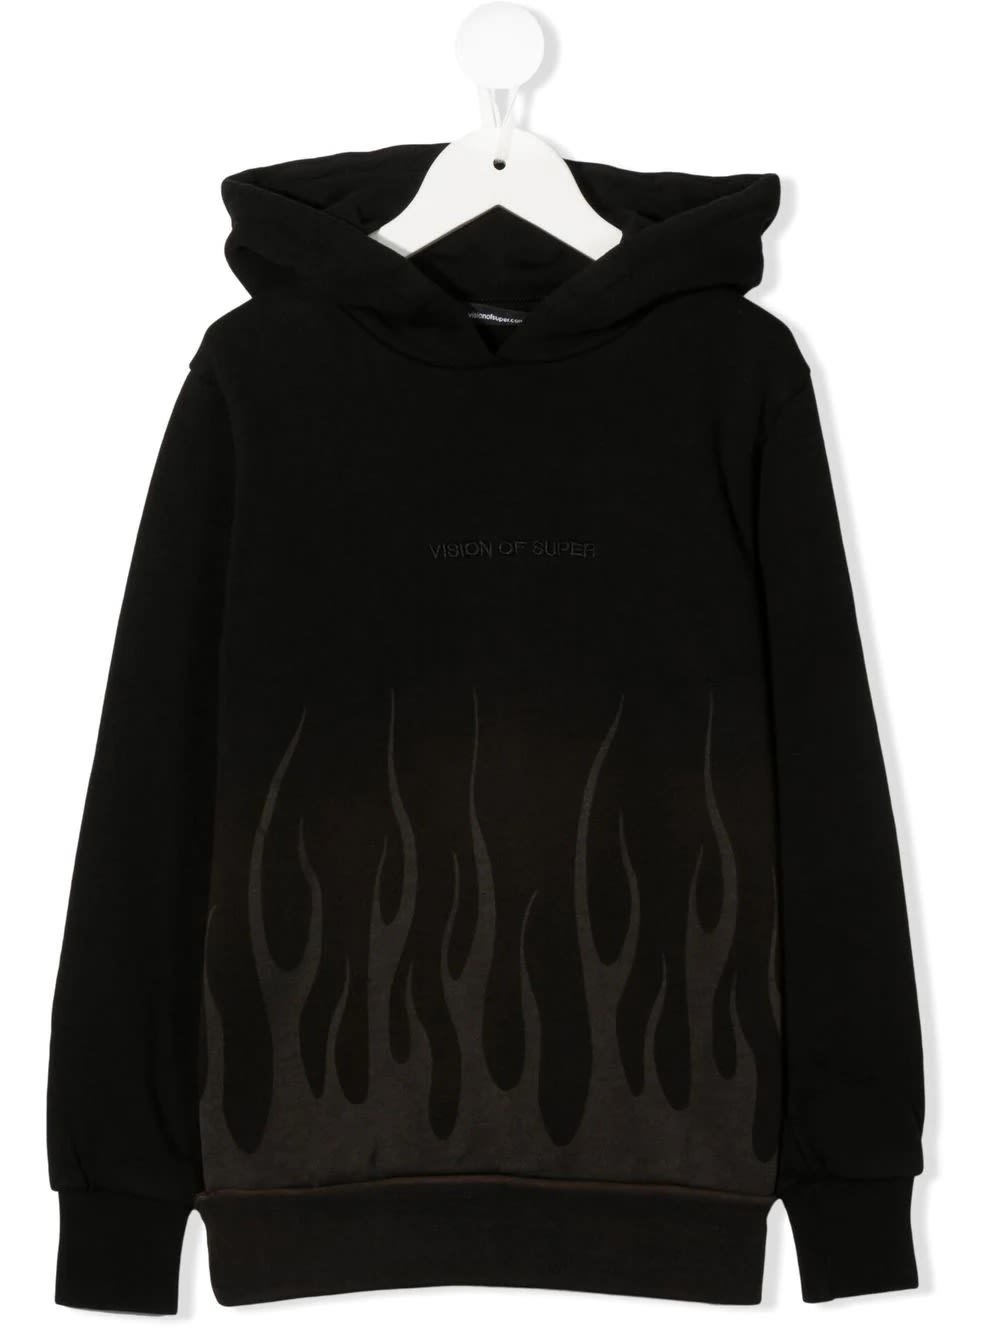 Vision of Super Kids Black Hoodie With Lasered 2.0 Flame